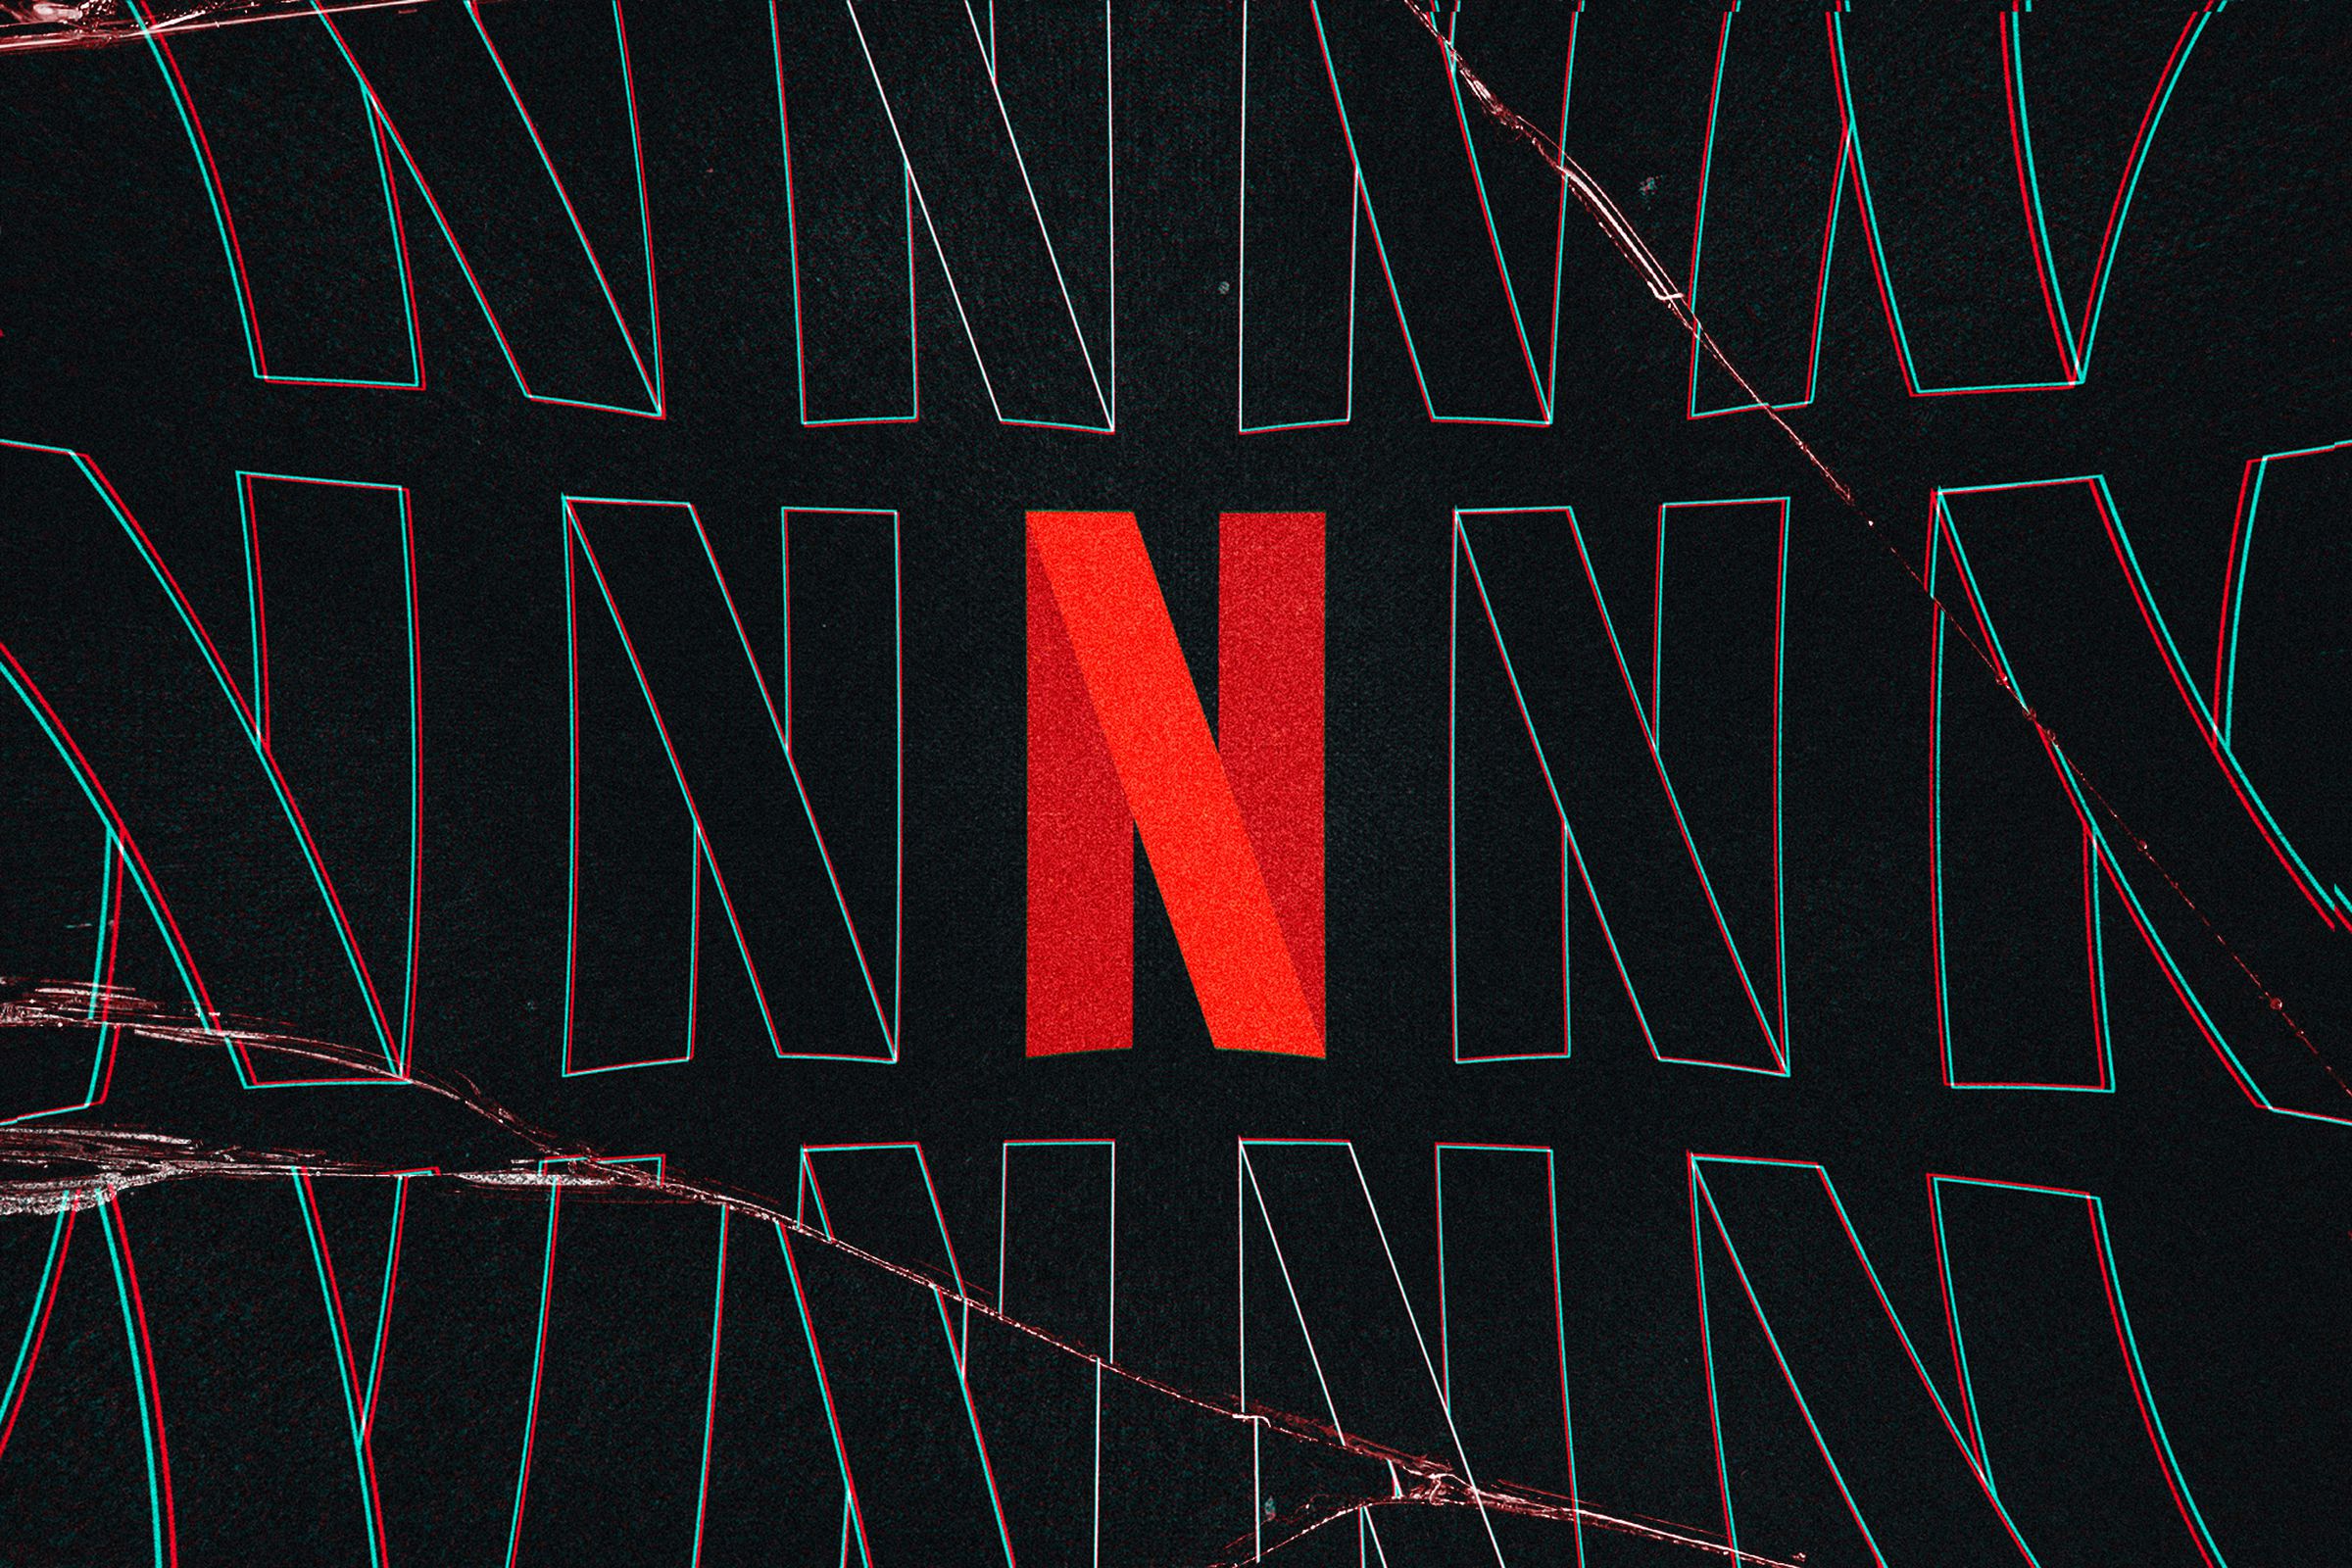 Three former Netflix engineers charged with insider trading